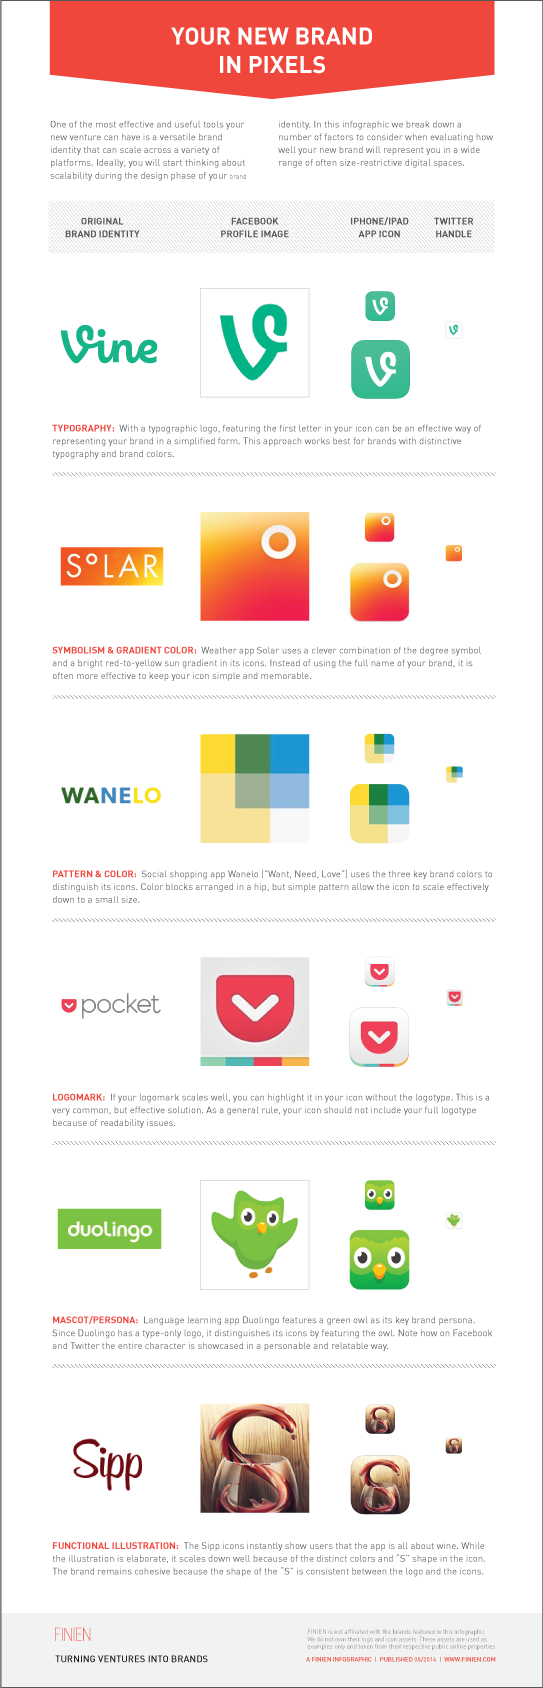 FINIEN_Infographic_Your_New_Brand_in_Pixels_THUMB